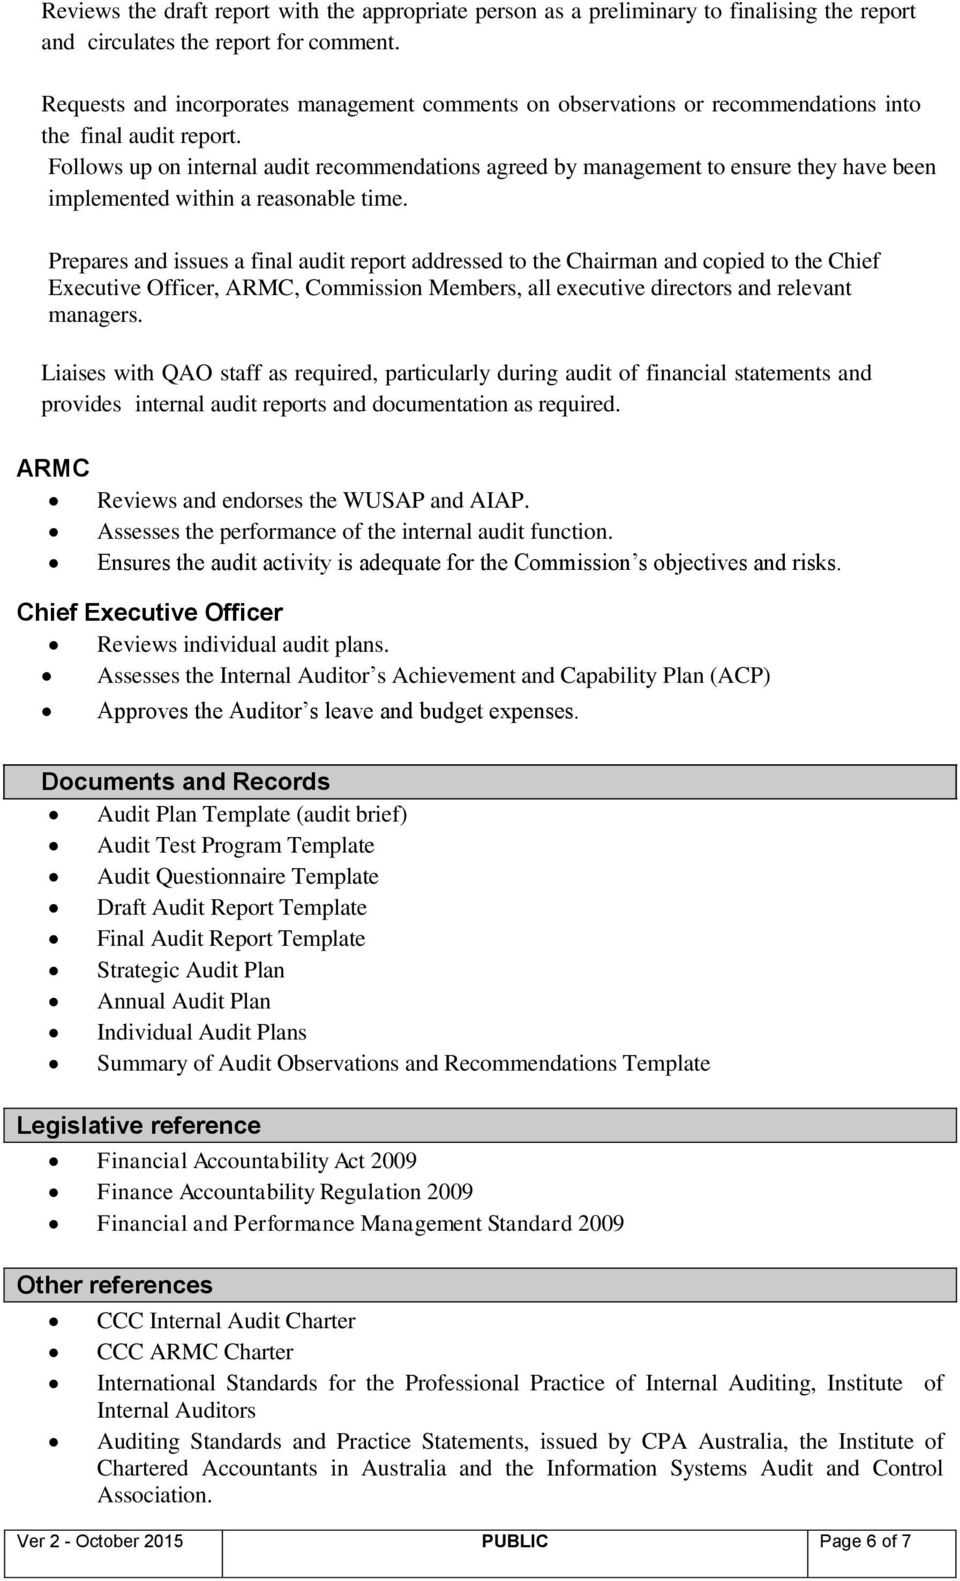 Sample Internal Audit Report Executive Summary In Internal Control Audit Report Template